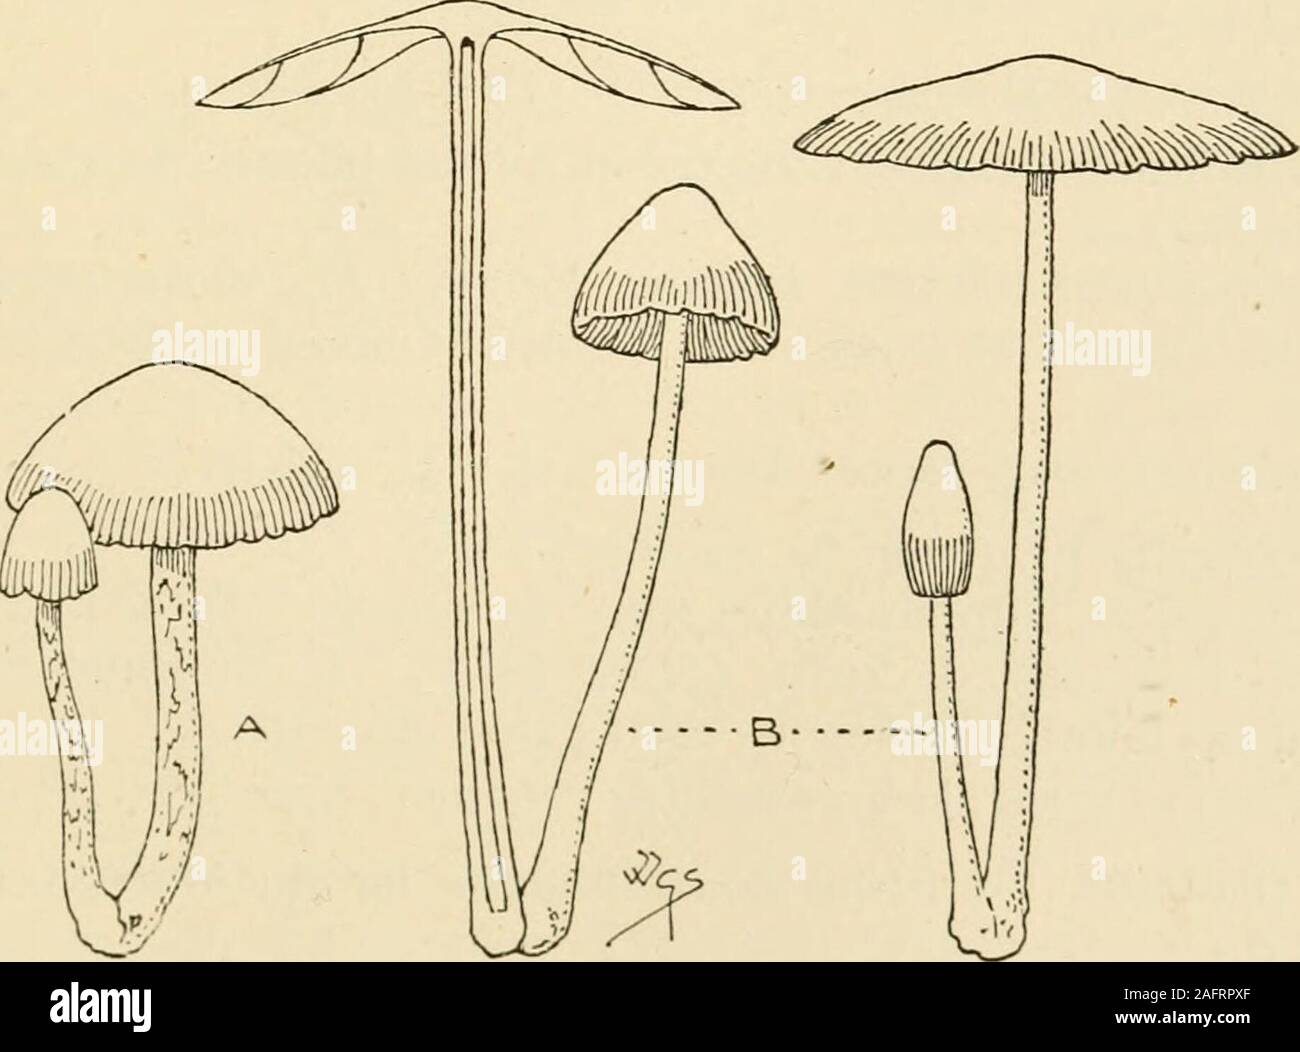 . Synopsis of the British Basidiomycetes ; a descriptive catalogue of the drawings and specimens in the Department of botany, British museum. CACE^ 211 961. C. filiformis B. & Br. (from the thread-like stem; Jihim, a thread) a.P. campanulato-expanded, grey, white-mealy; mid. sienna. St. pallid or white. G. linear, adnate, blackish.On the ground in woods. Sept. £ x T5g X ?£% in. j. Hemerobice. 962. C. hemerobius Fr. (from the length of its life—one day; Gr. hemera, a day, bios, life) a.P. campanulato-expanded, umber. St. smooth, pallid. G. adnate,linear, blackish. Damp, shady, rich grassy place Stock Photo